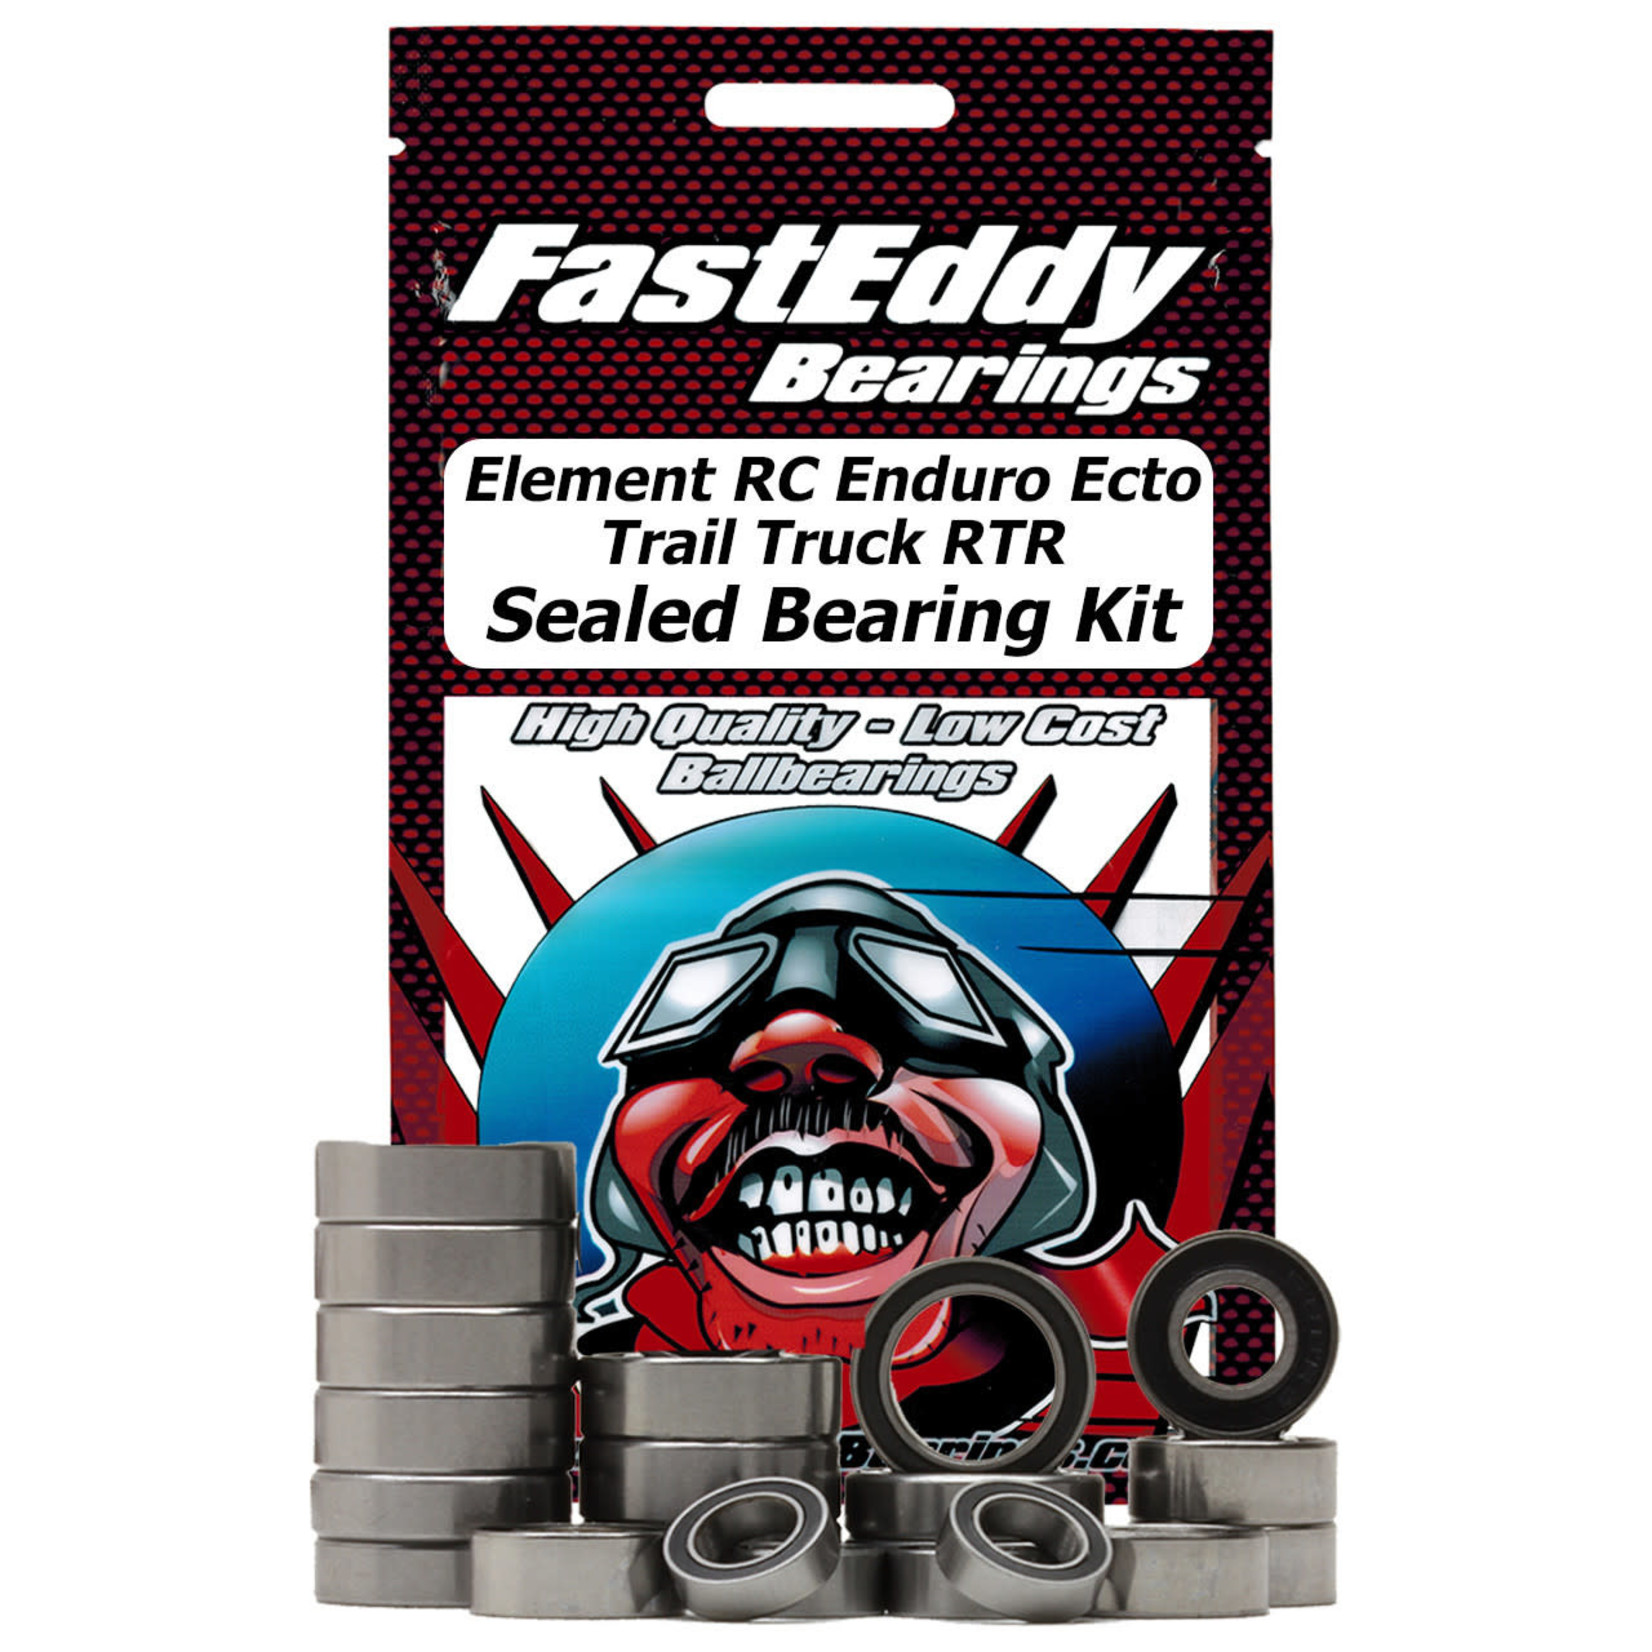 FastEddy FastEddy Bearings Element RC Enduro Ecto Trail Truck RTR Sealed Bearing Kit #TFE7219